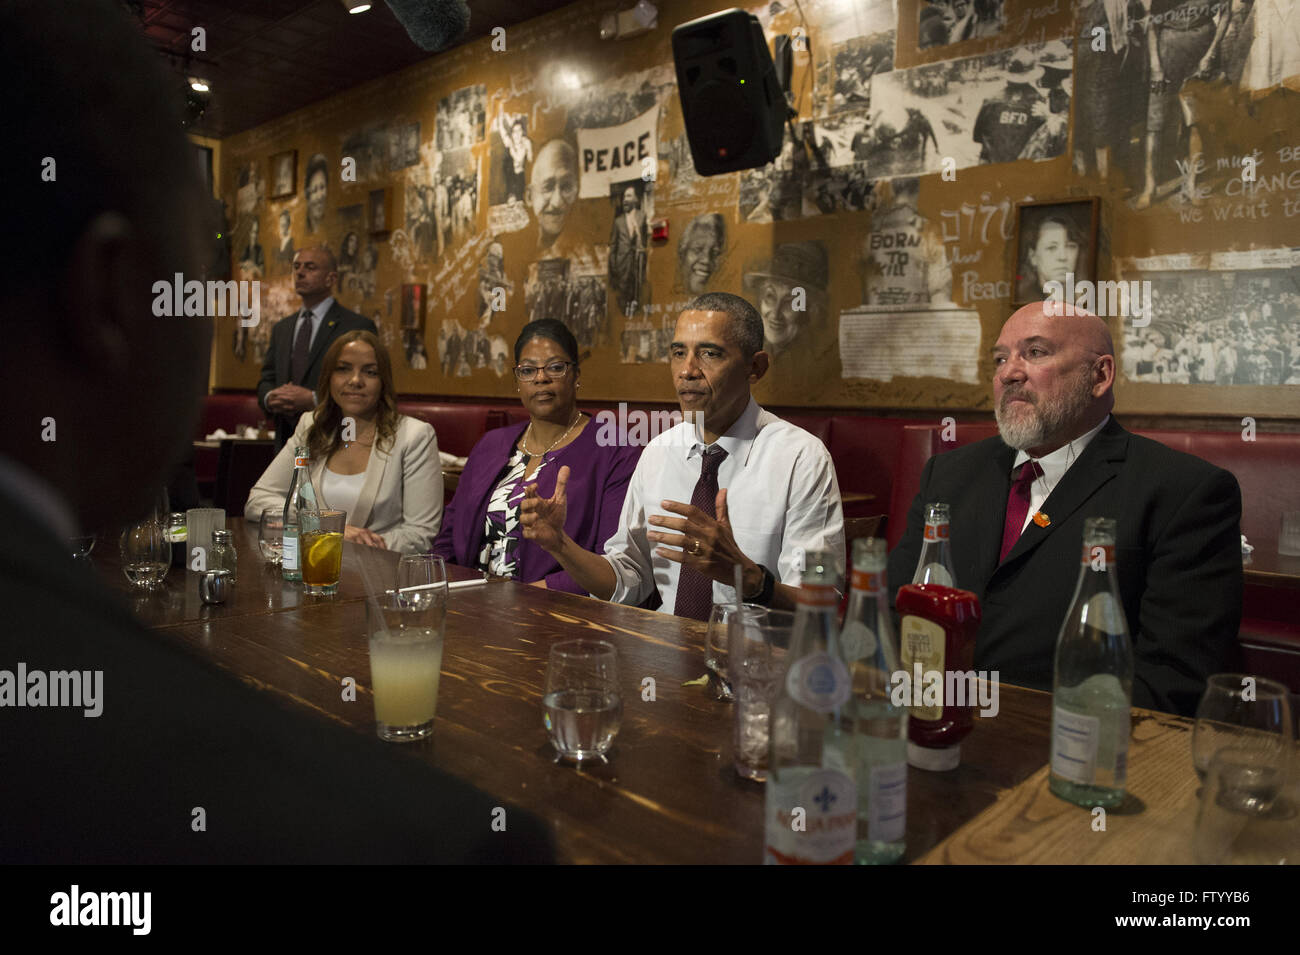 Washington, District of Columbia, USA. 30th Mar, 2016. United States President Barack Obama speaks to the media after having lunch with formerly incarcerated individuals who have received commutations, at Bus Boys and Poets restaurant in Washington, DC on March 30, 2016. Obama commuted 61 additional sentences today.Credit: Kevin Dietsch/Pool via CNP © Kevin Dietsch/CNP/ZUMA Wire/Alamy Live News Stock Photo